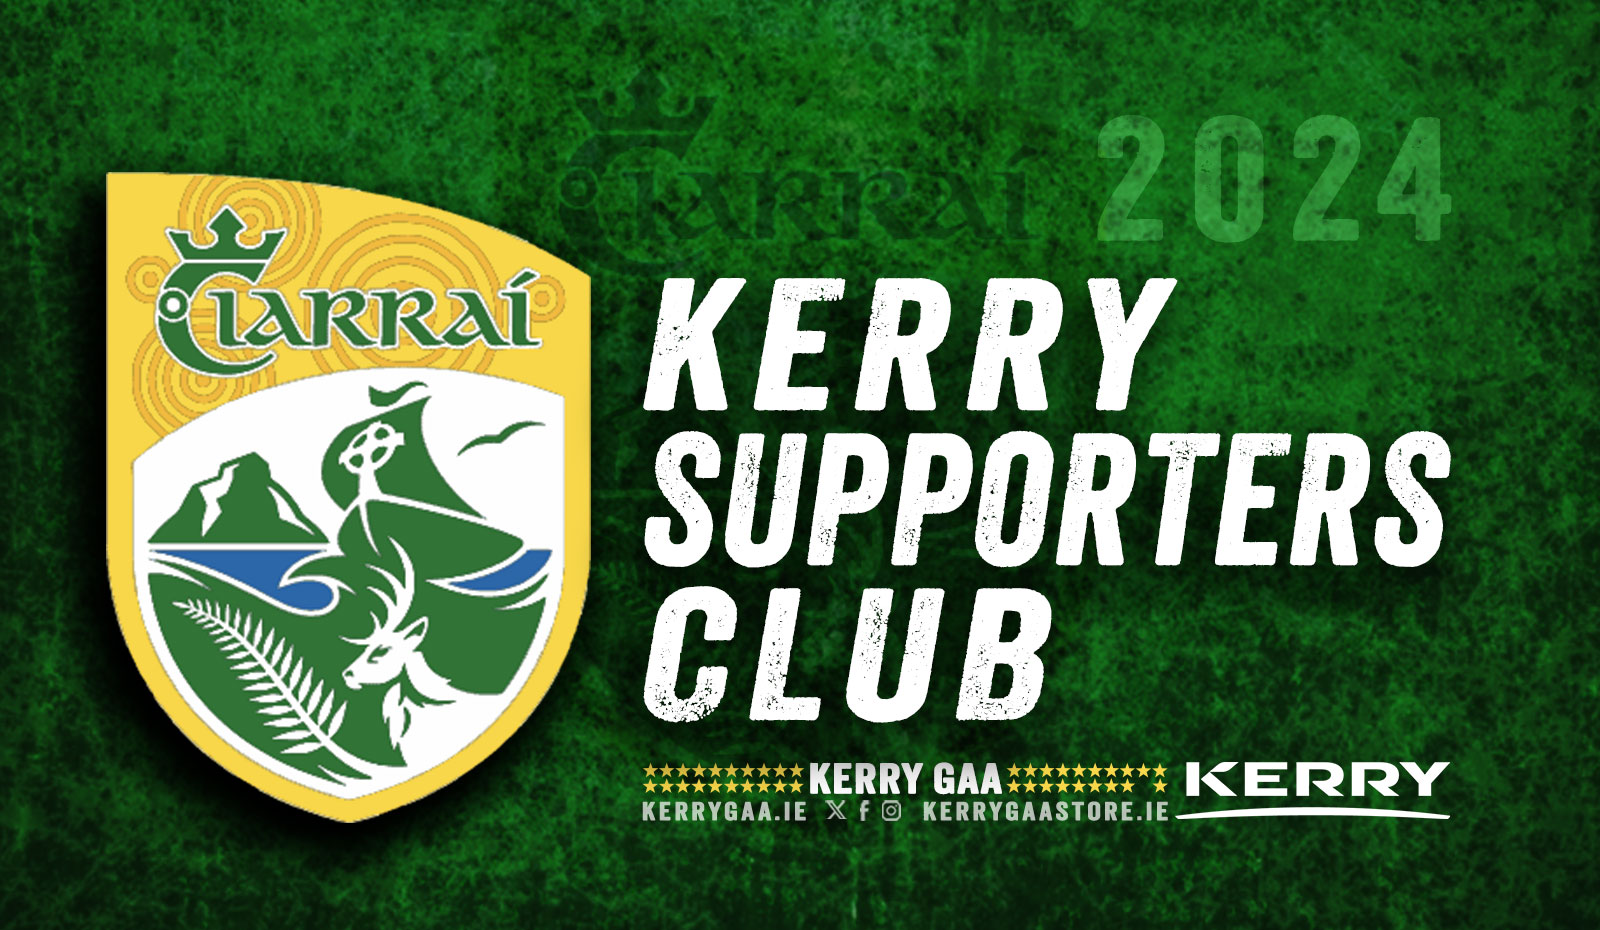 Supporters Club – Bus to Clones